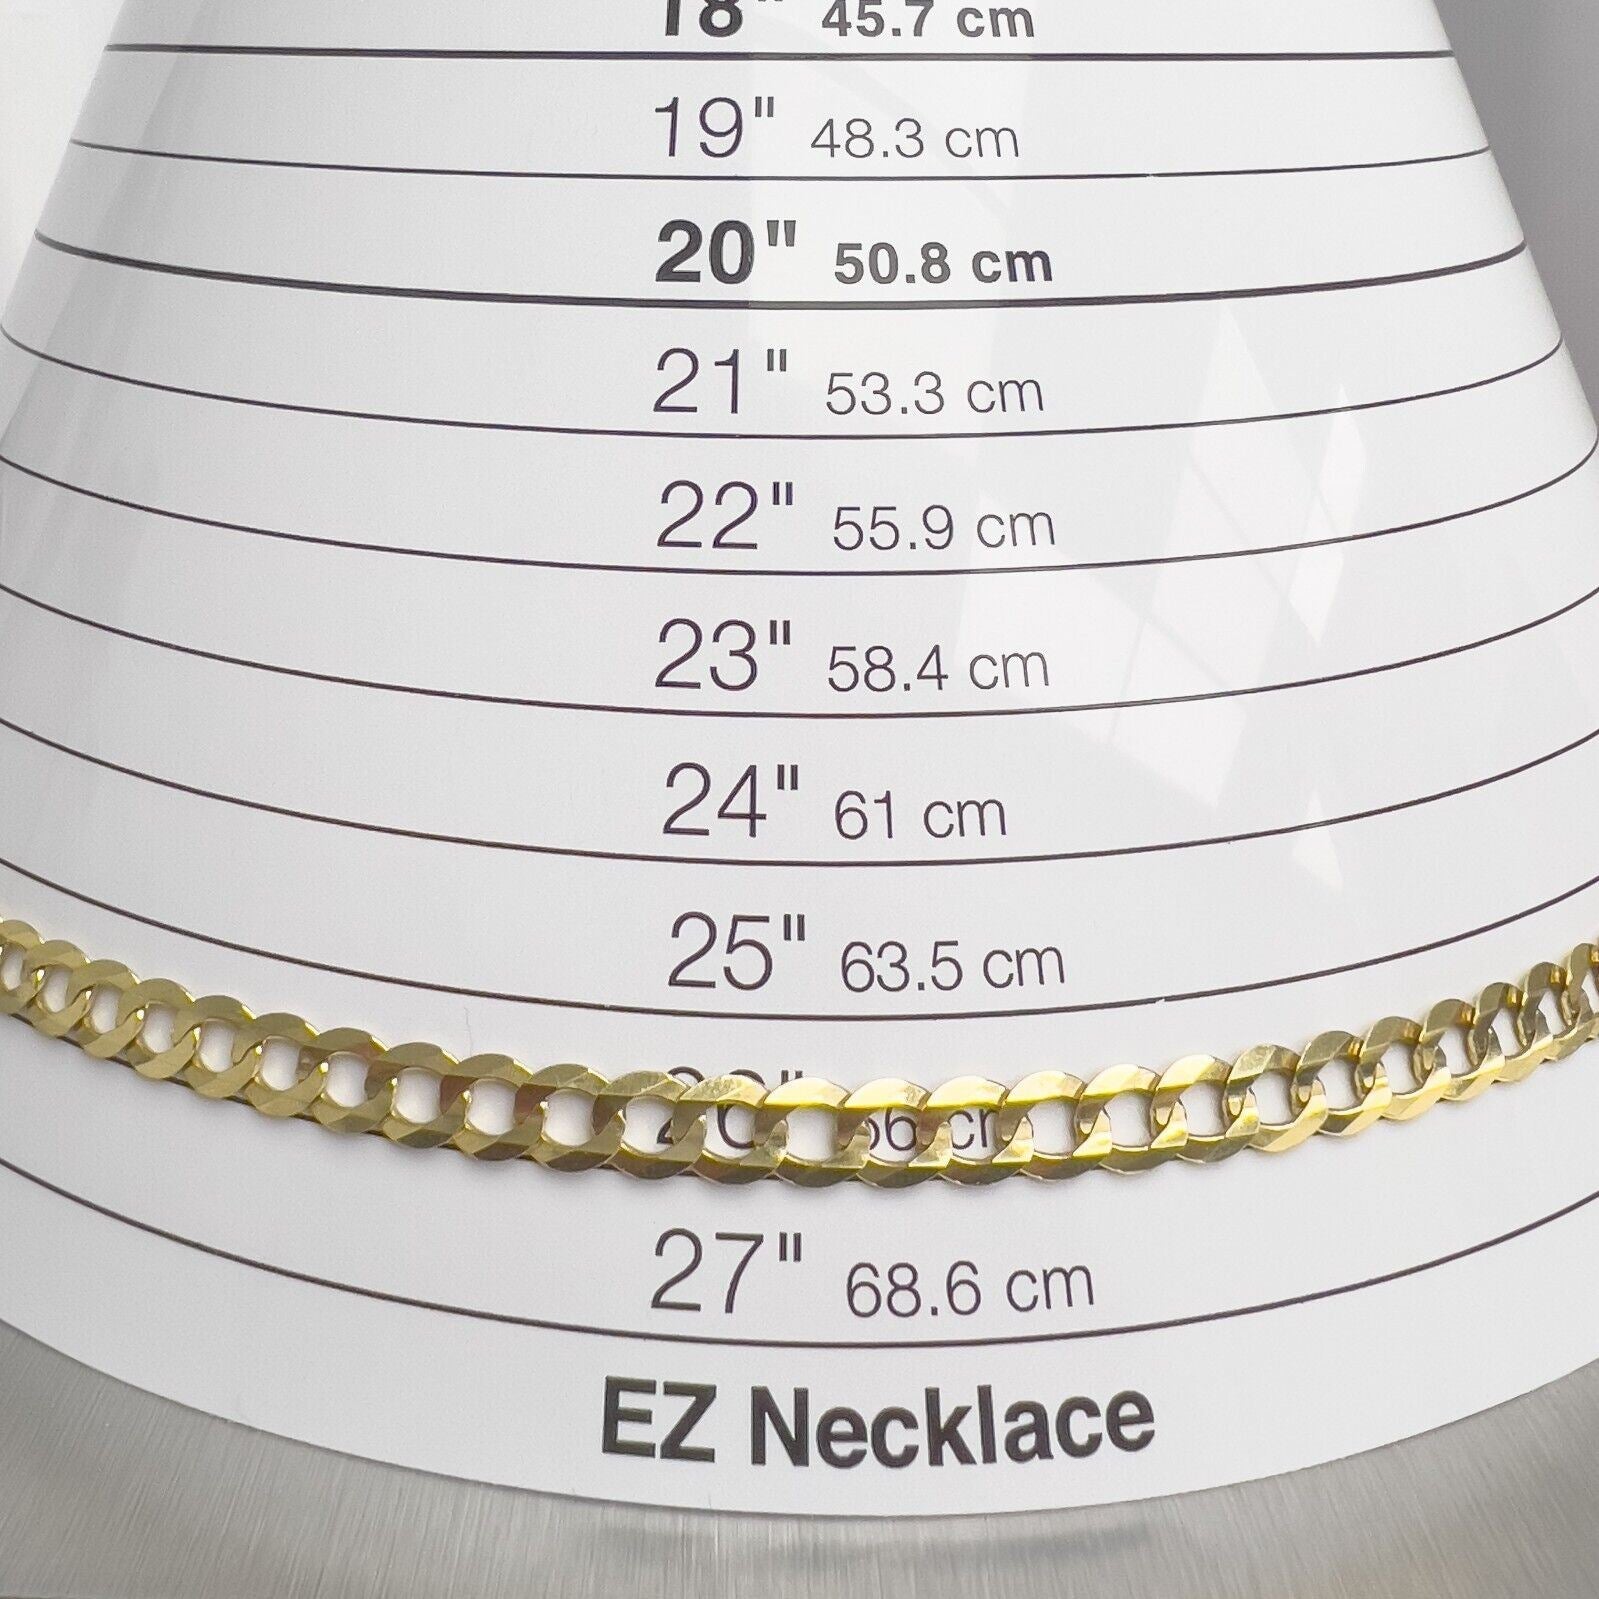 14k Yellow Gold Flat Cuban Curb Link 7.00mm Chain Necklace 26" 31.3g